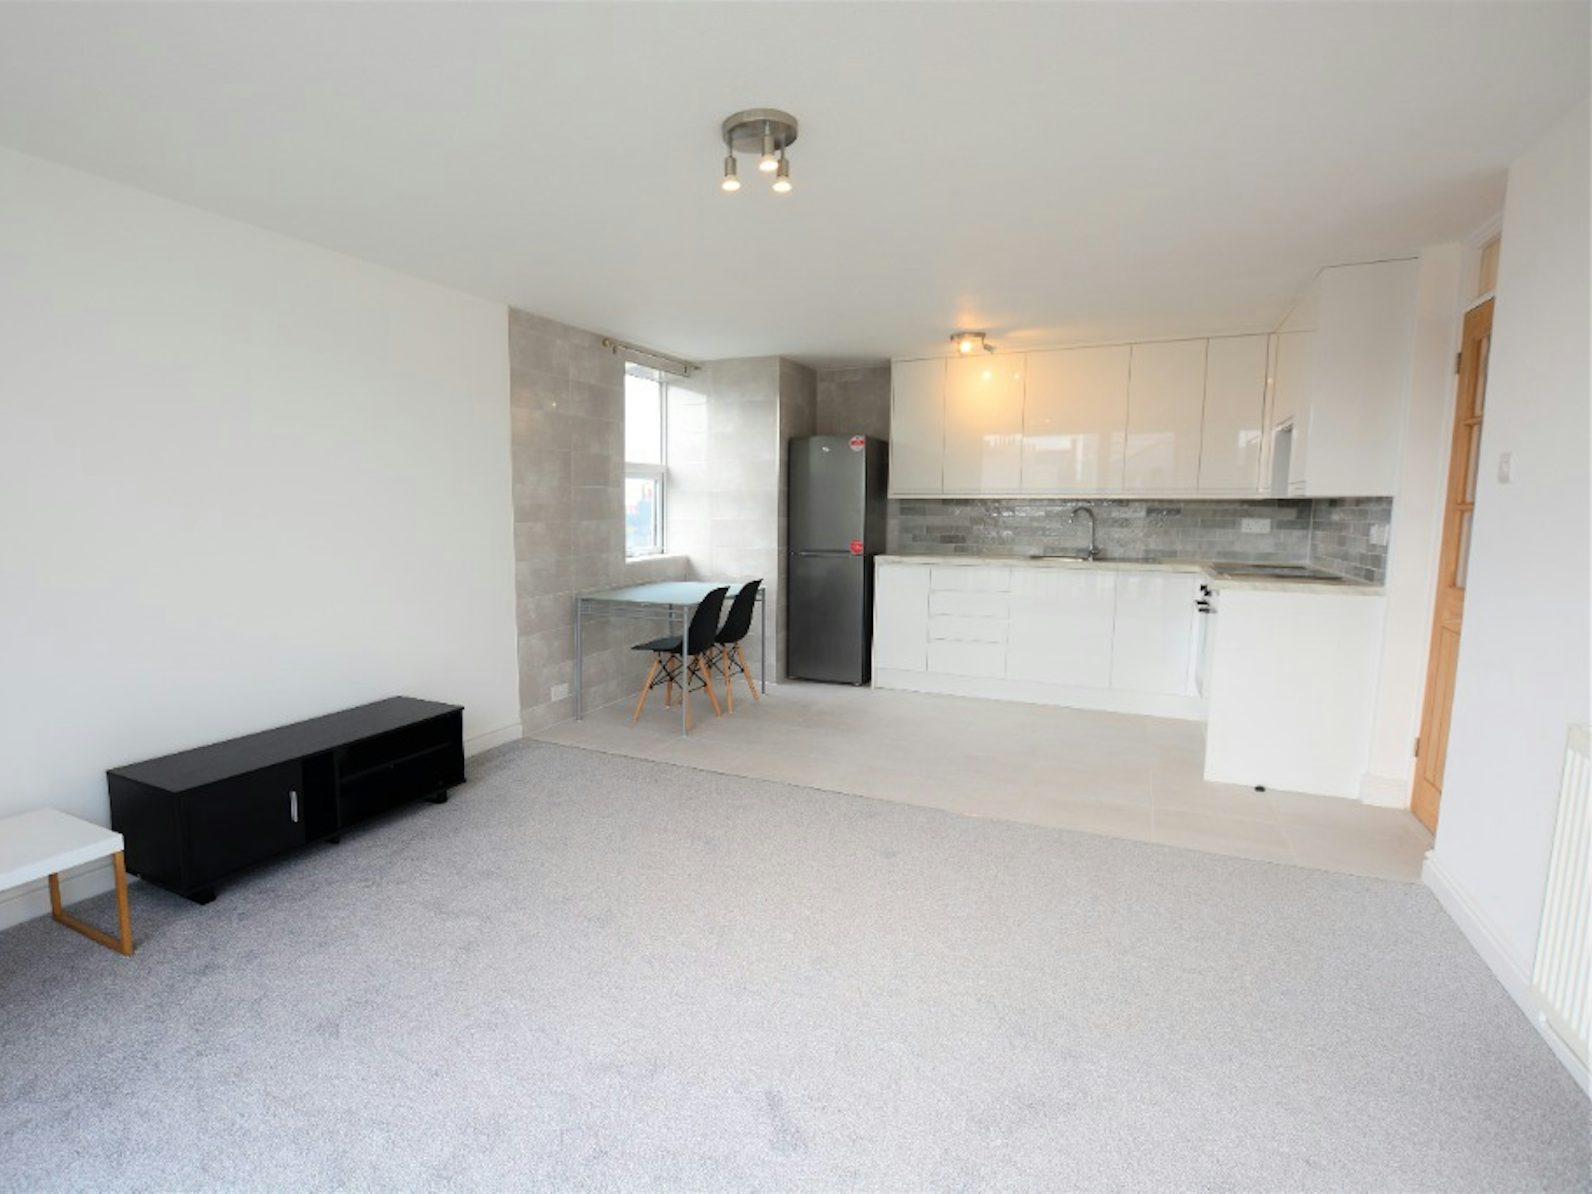 Flat to rent on Sillwood Place Brighton, BN1